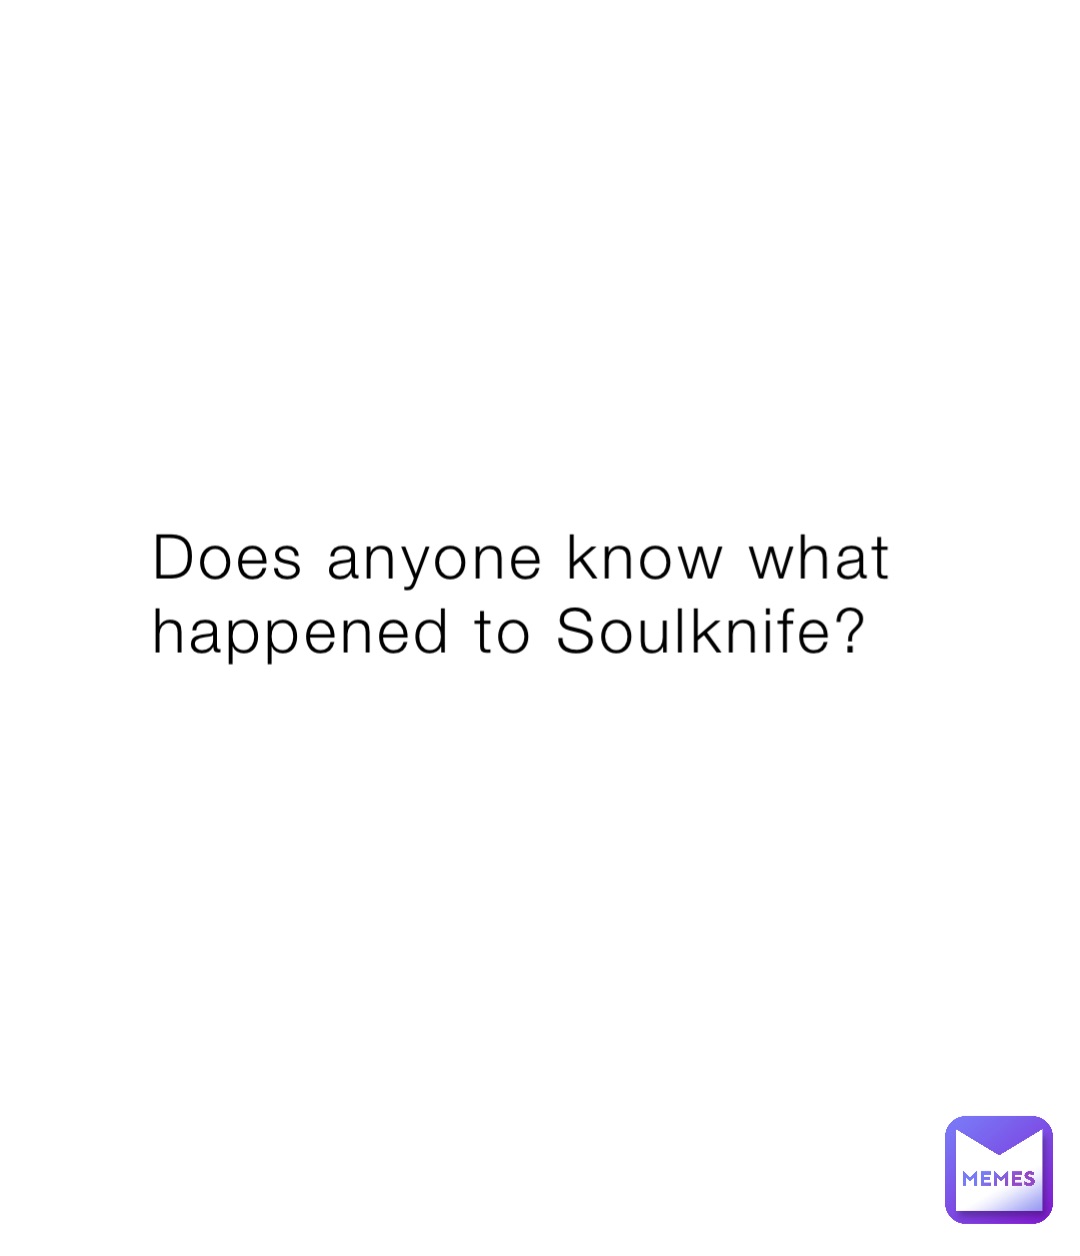 Does anyone know what happened to Soulknife?